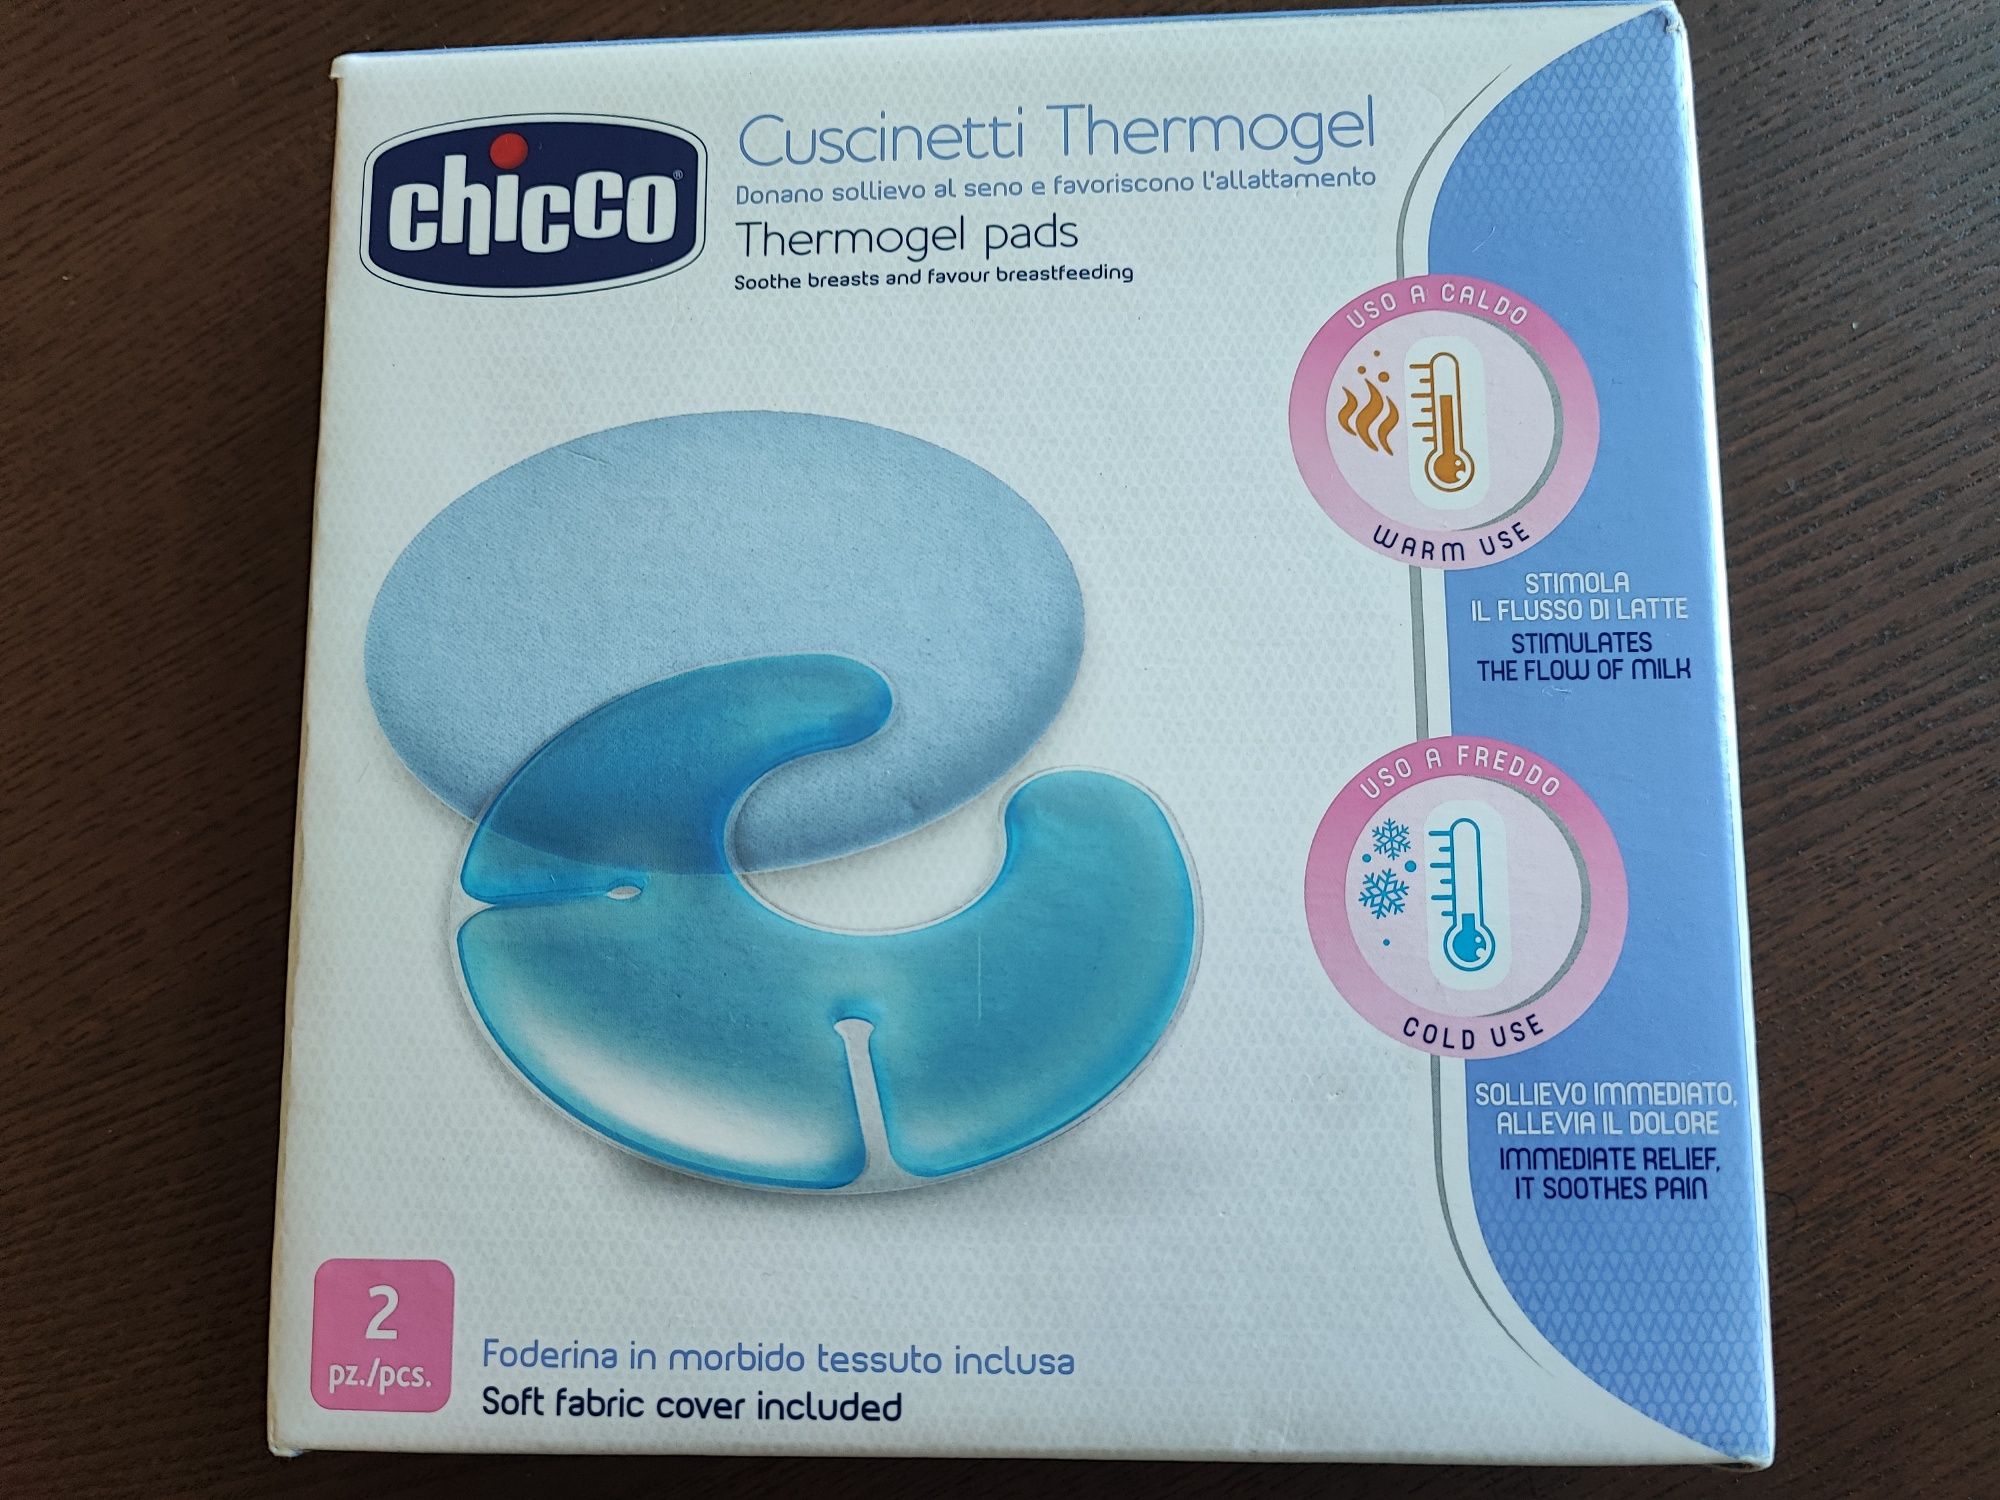 ThermoGel Pads, 2 uds, da Chicco